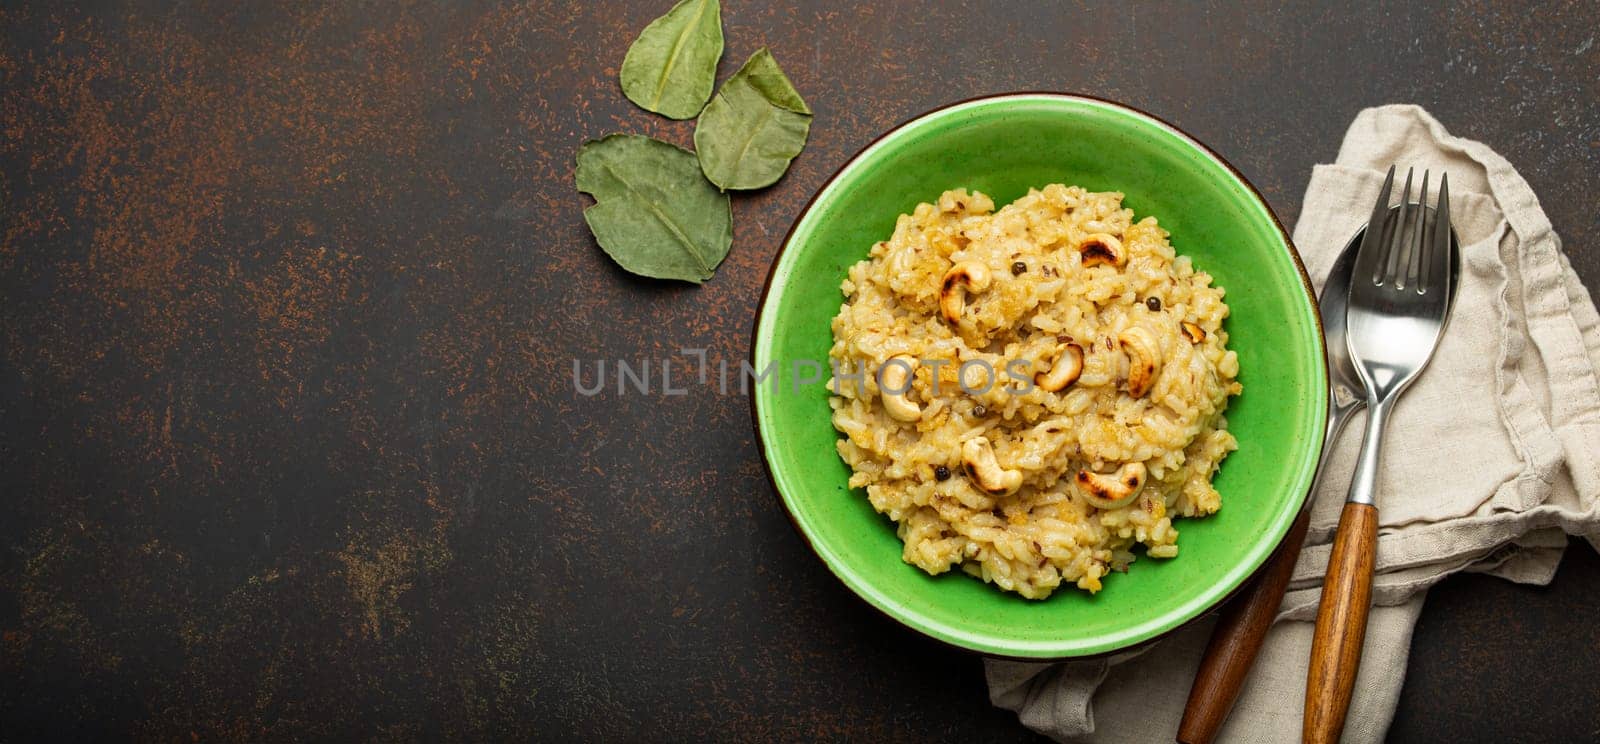 Ven Pongal (Khara Pongal), traditional Indian savoury rice dish made during celebrating Pongal festival, served in bowl top view on concrete rustic background, space for text.